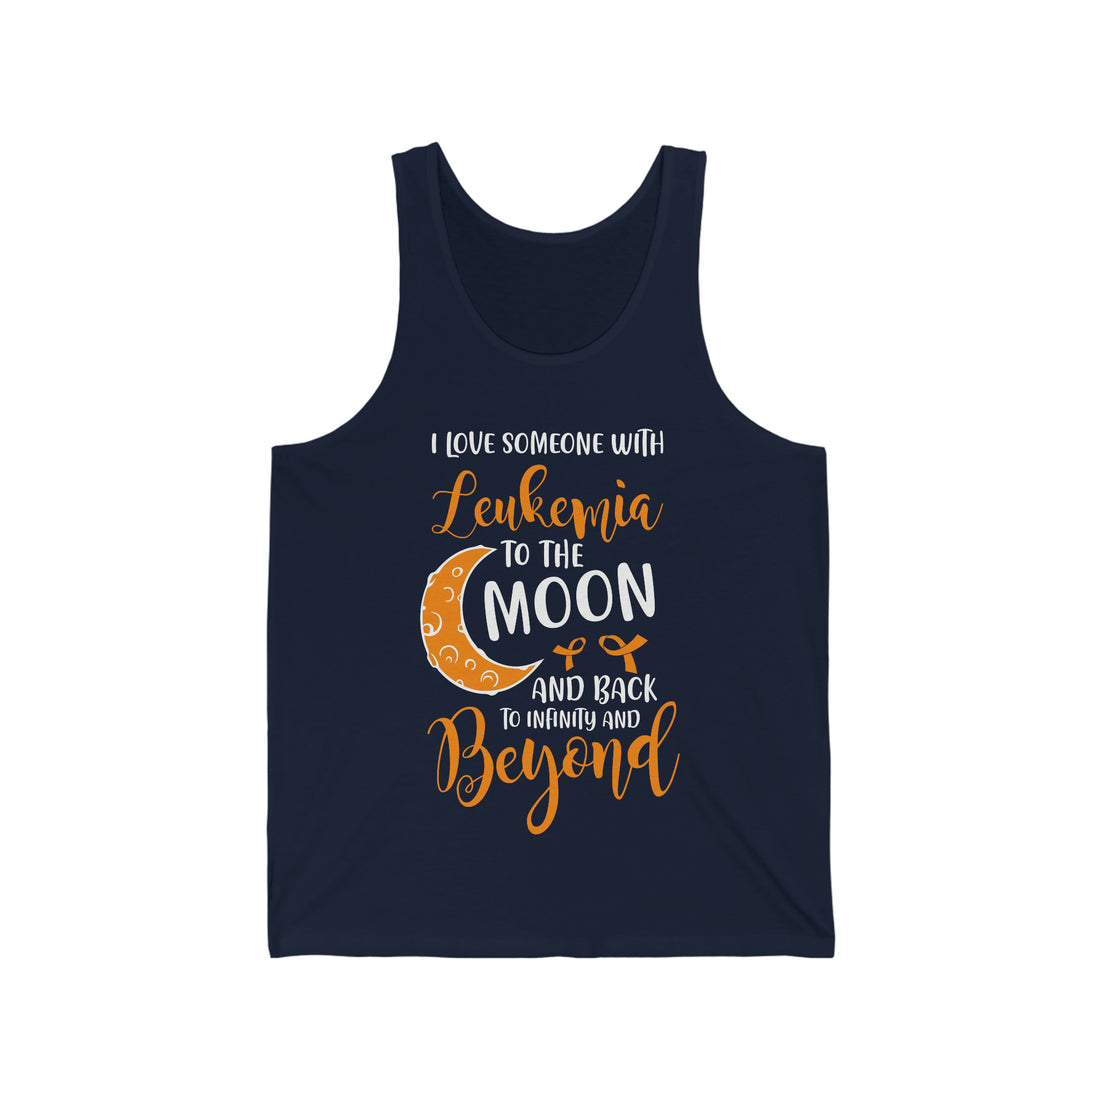 I Love Someone With Leukemia To The Moon And Back - Unisex Jersey Tank Top